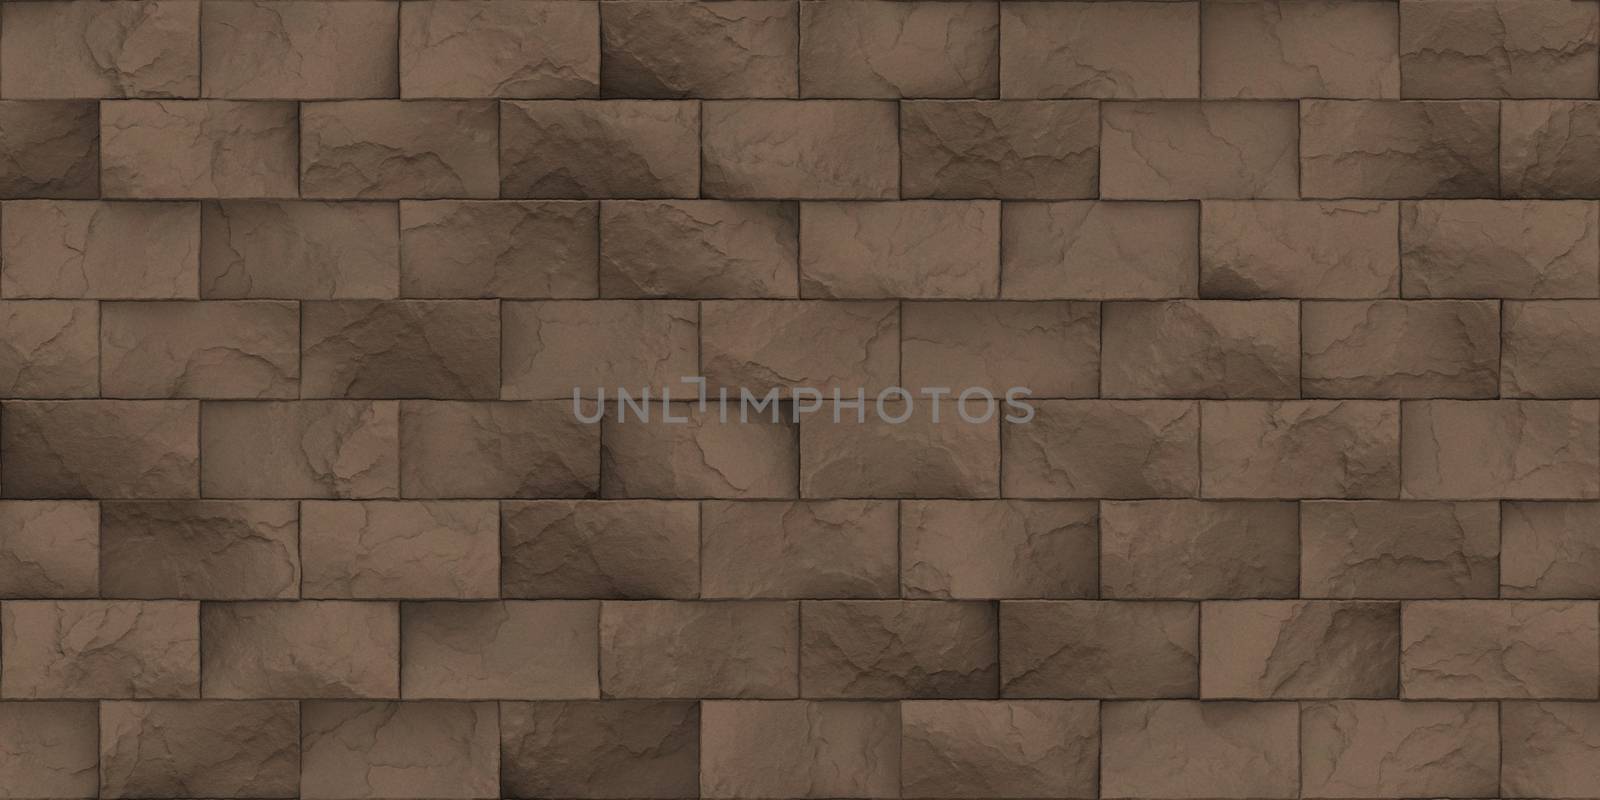 Beige Seamless Stone Block Wall Texture. Building Facade Background. Exterior Architecture Decorative House Facing.